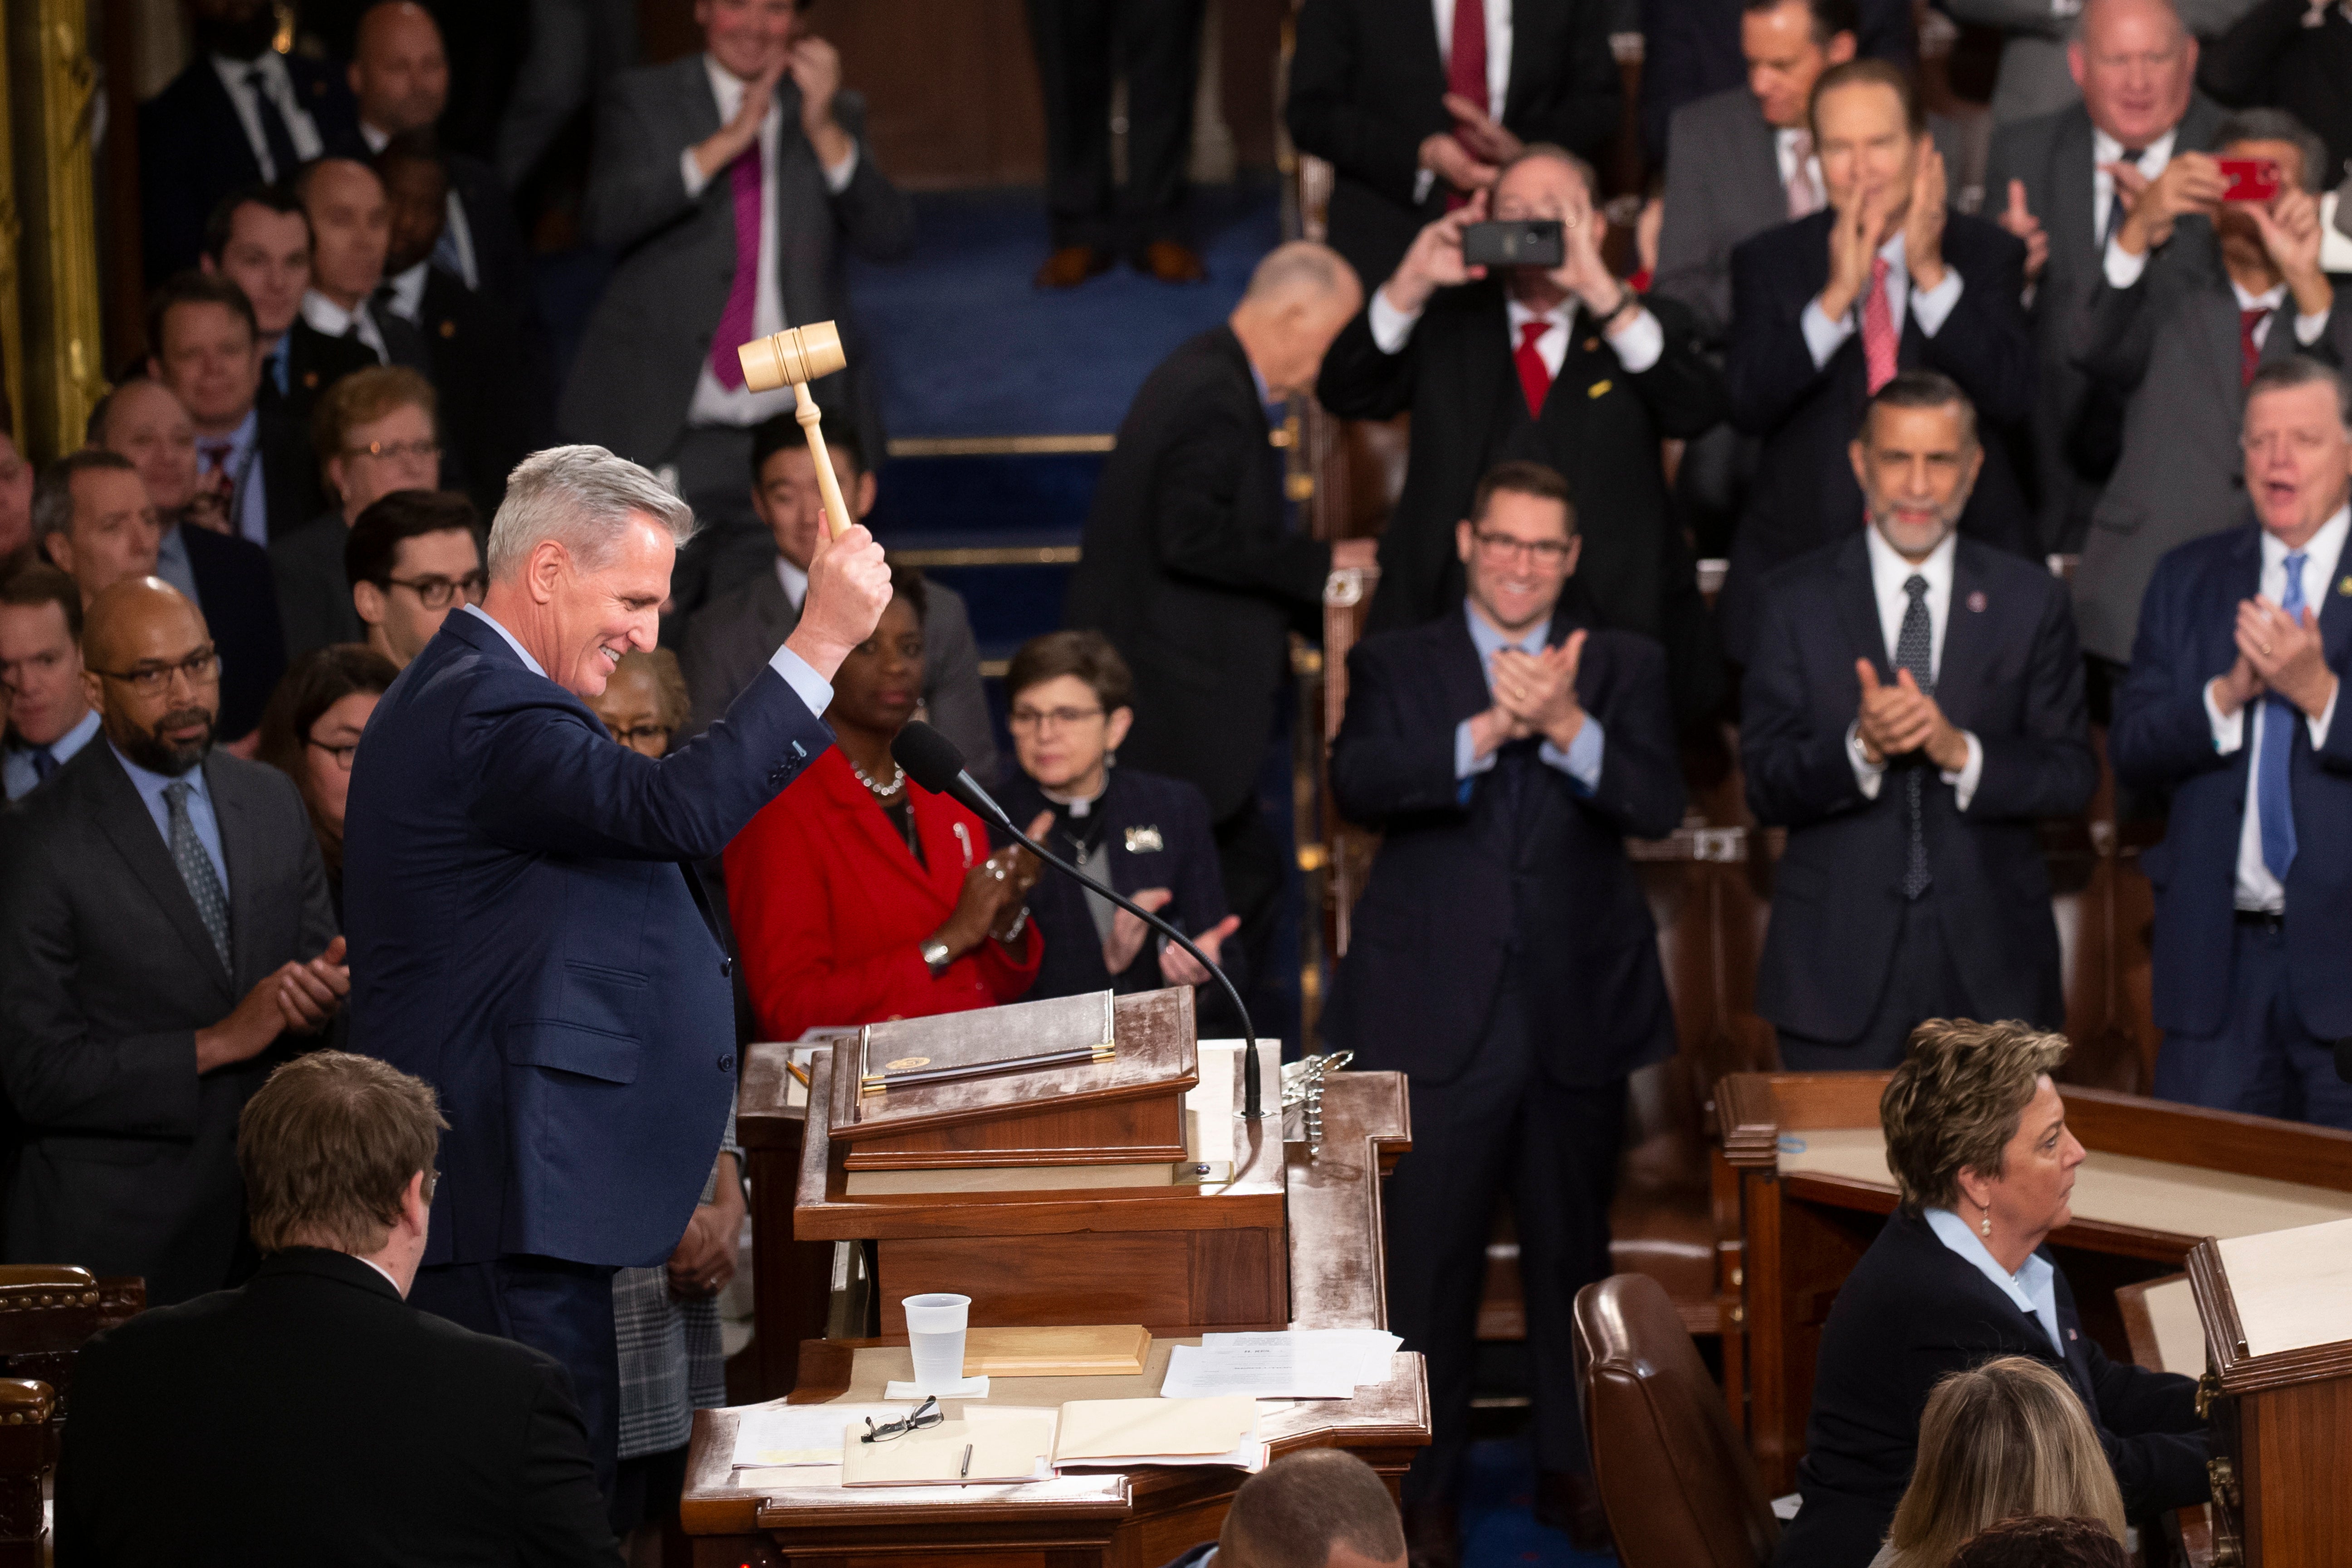 House Republican Leader Kevin McCarthy bangs the gavel after being elected to become the Speaker of the House after 15 rounds of voting, in the House chamber on Capitol Hill in Washington, DC, USA, 07 January 2023